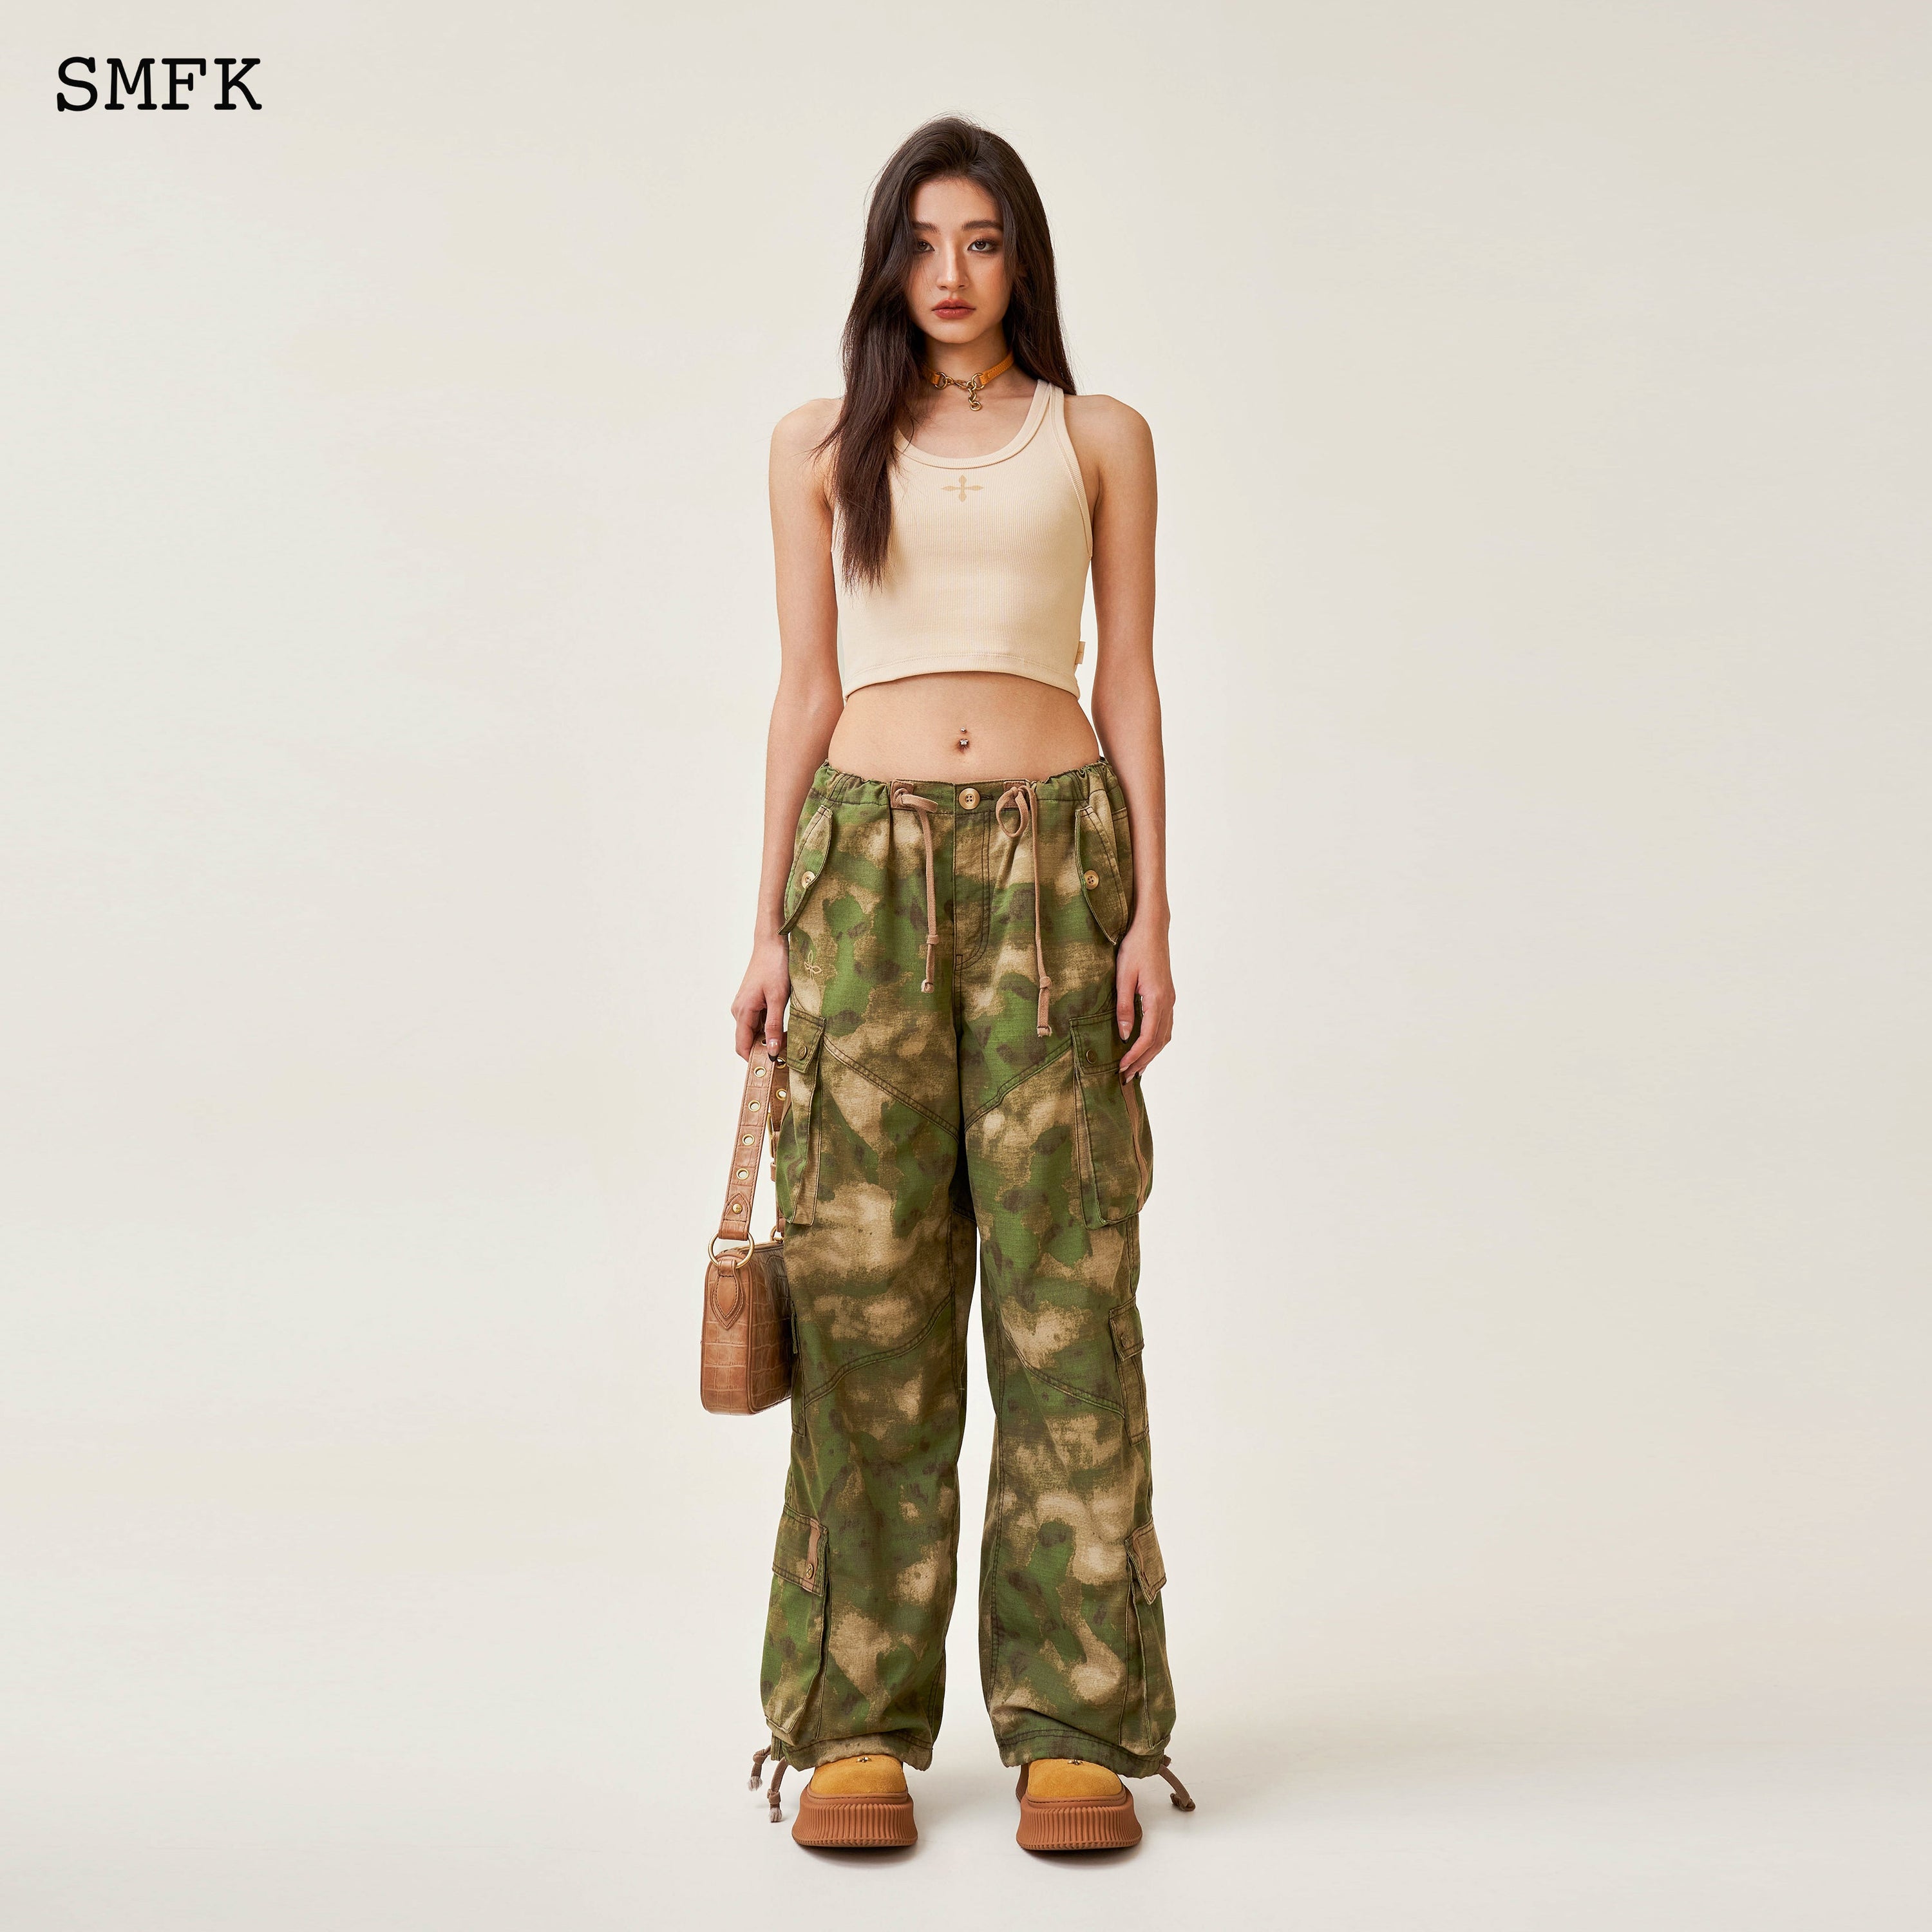 Compass Cobra Camouflage Paratrooper Pants - SMFK Official